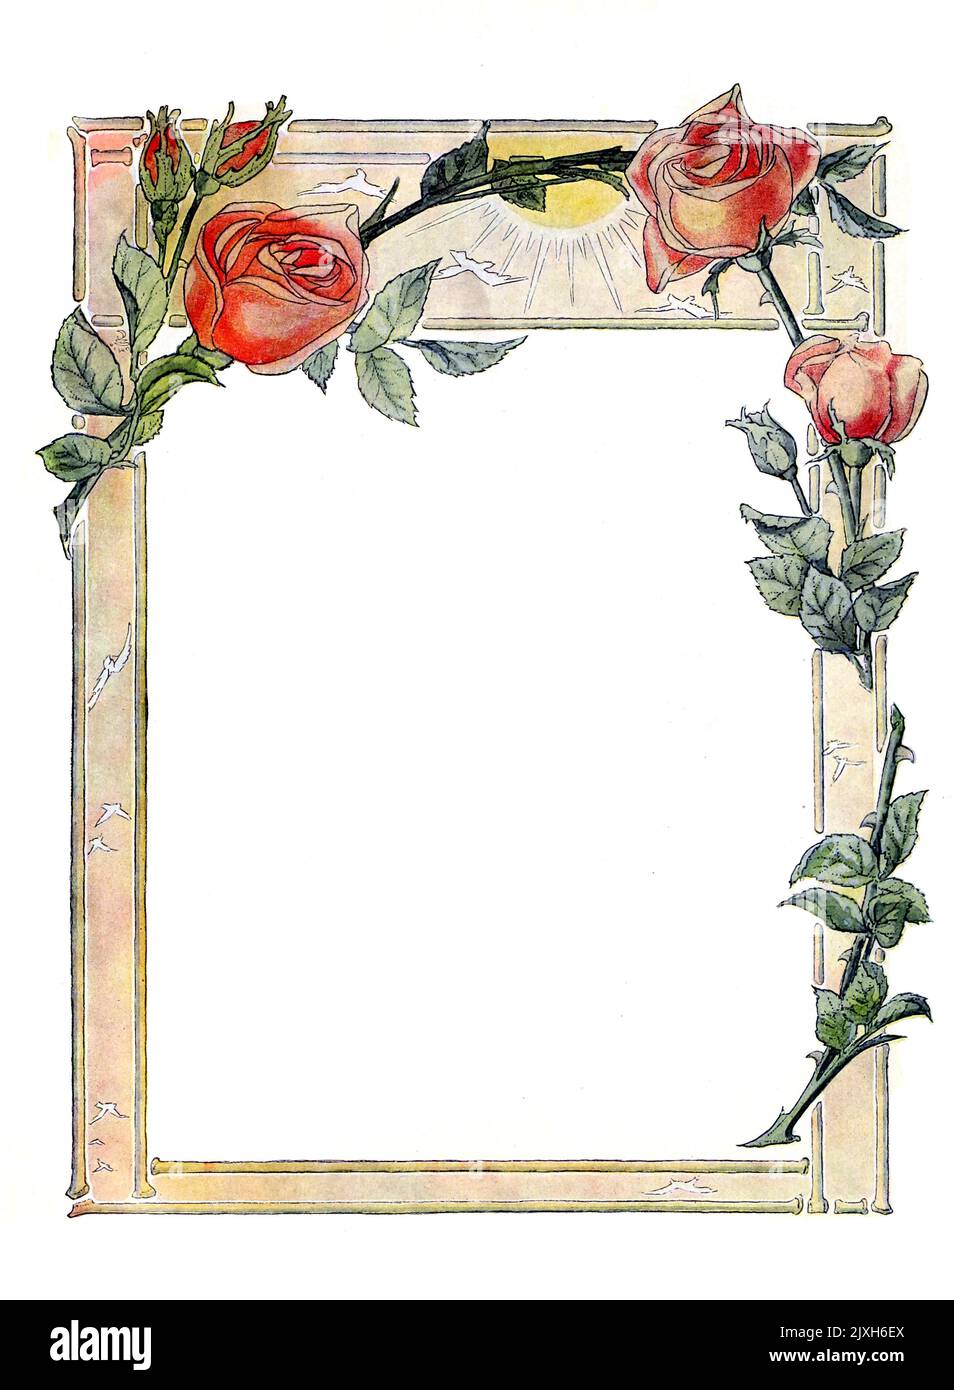 floral frame decorations on white background by Earl Stetson Crawford published 1909 Stock Photo